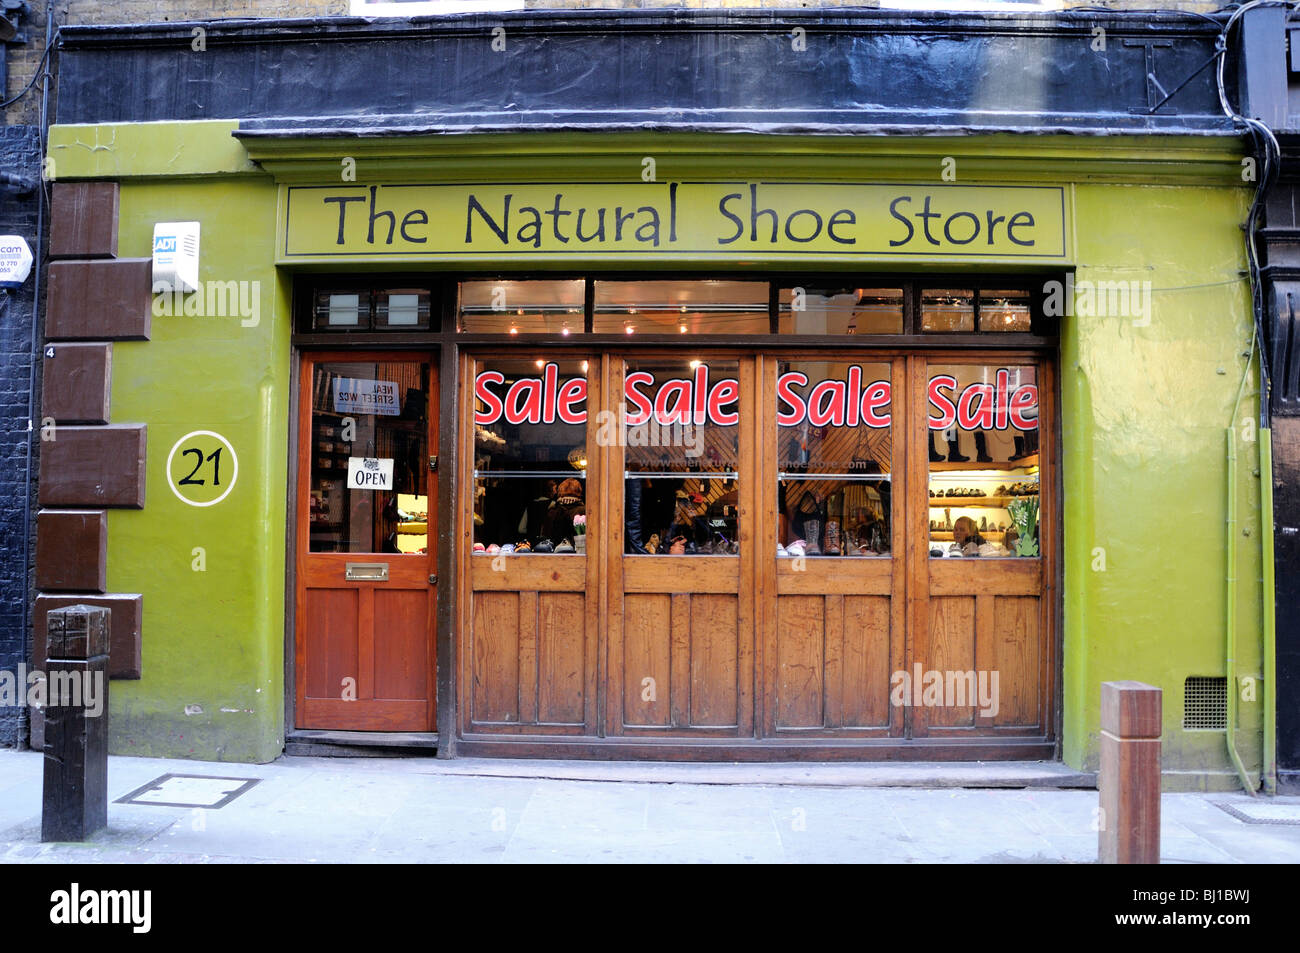 The Natural Shoe Store, old shop, in Neil Street Covent Garden London England UK Stock Photo